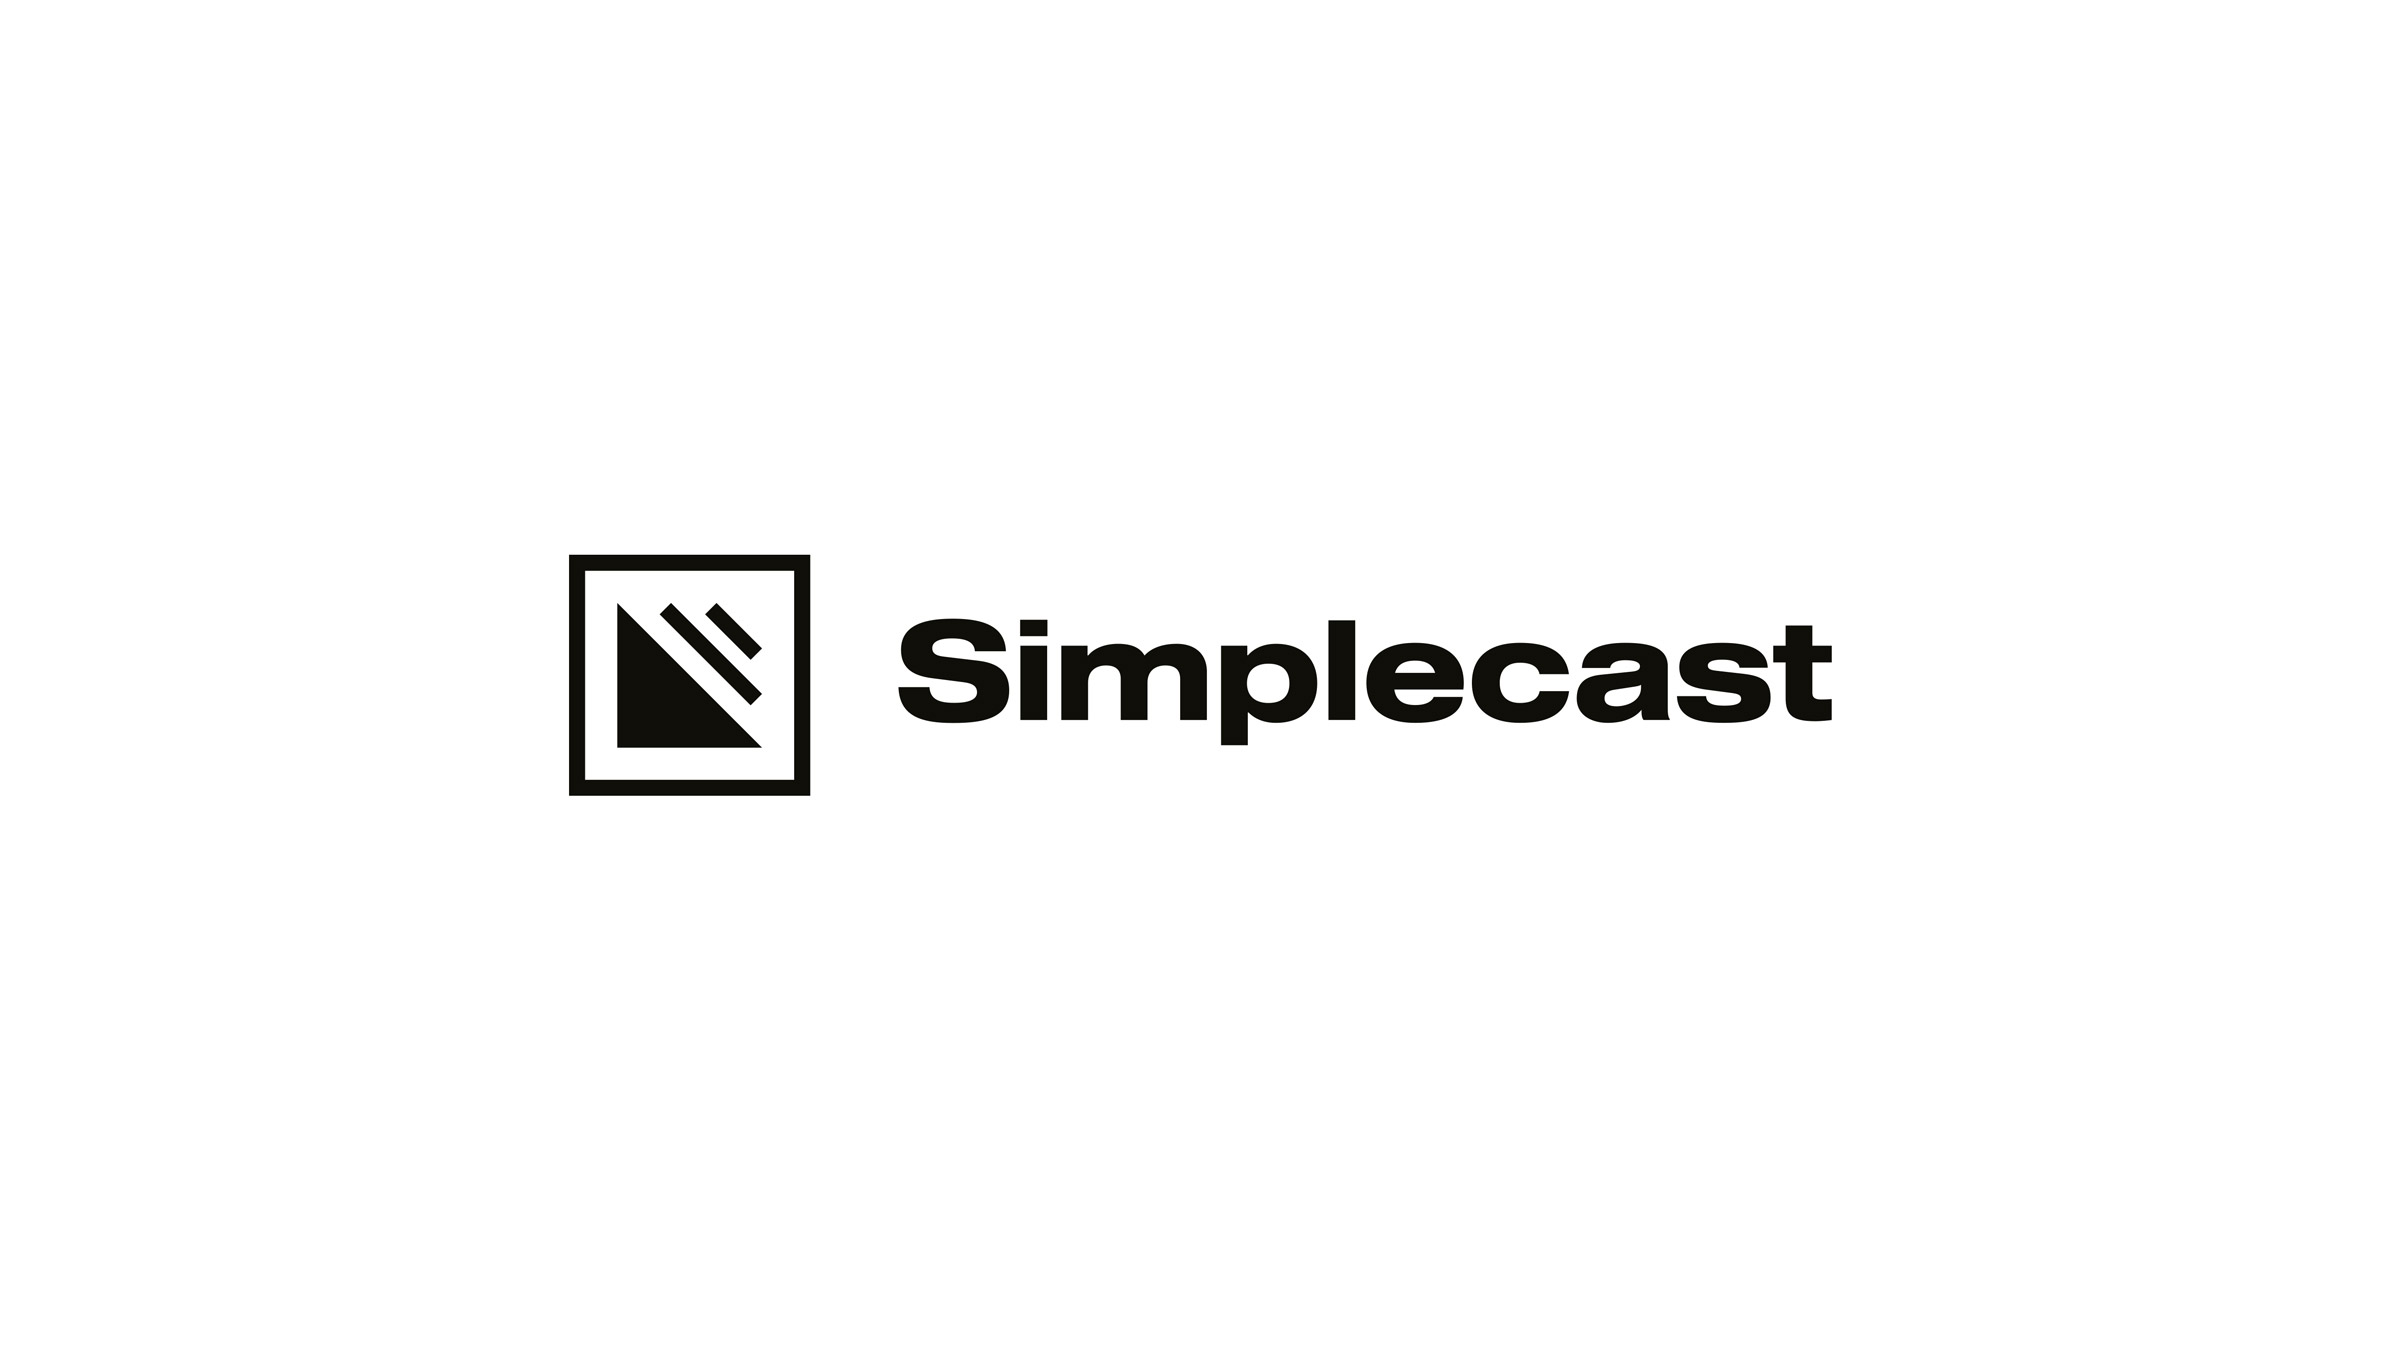 heberger-diffuser-podcast-simplecast-studiomatic